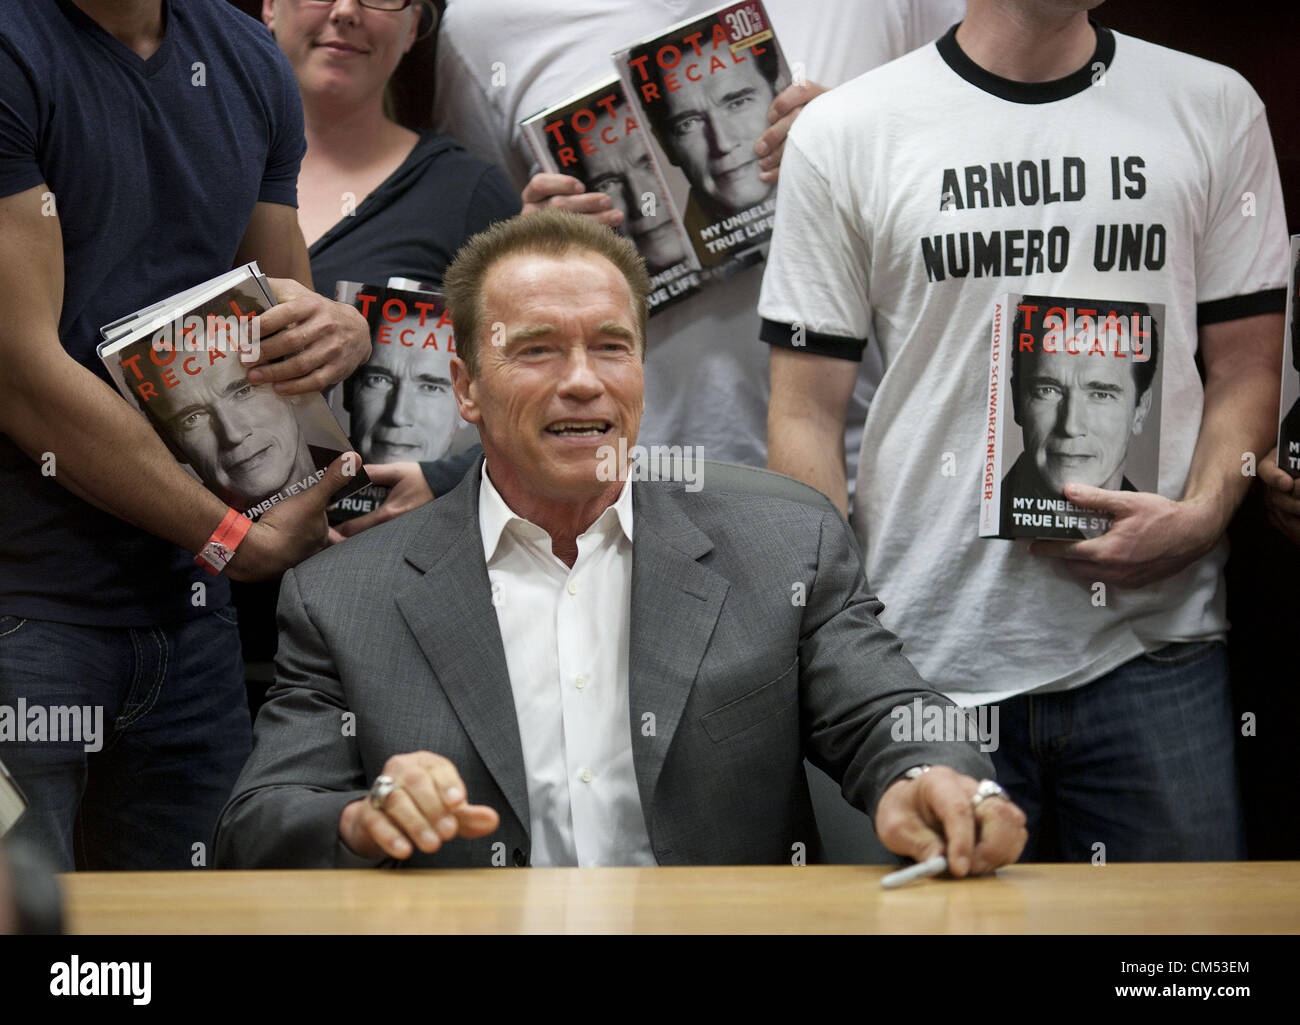 Oct. 5, 2012 - Los Angeles, California, U.S. - Actor and former California Governor ARNOLD SCHWARZENEGGER signs his memoir 'Total Recall - My Unbelievably True Life Story'. The book, named after one of his blockbuster movies, includes details of his marital infidelities including fathering a child with his housekeeper, leading his wife M. Shriver to file for divorce. (Credit Image: © Armando Arorizo/Prensa Internacional/ZUMAPRESS.com) Stock Photo